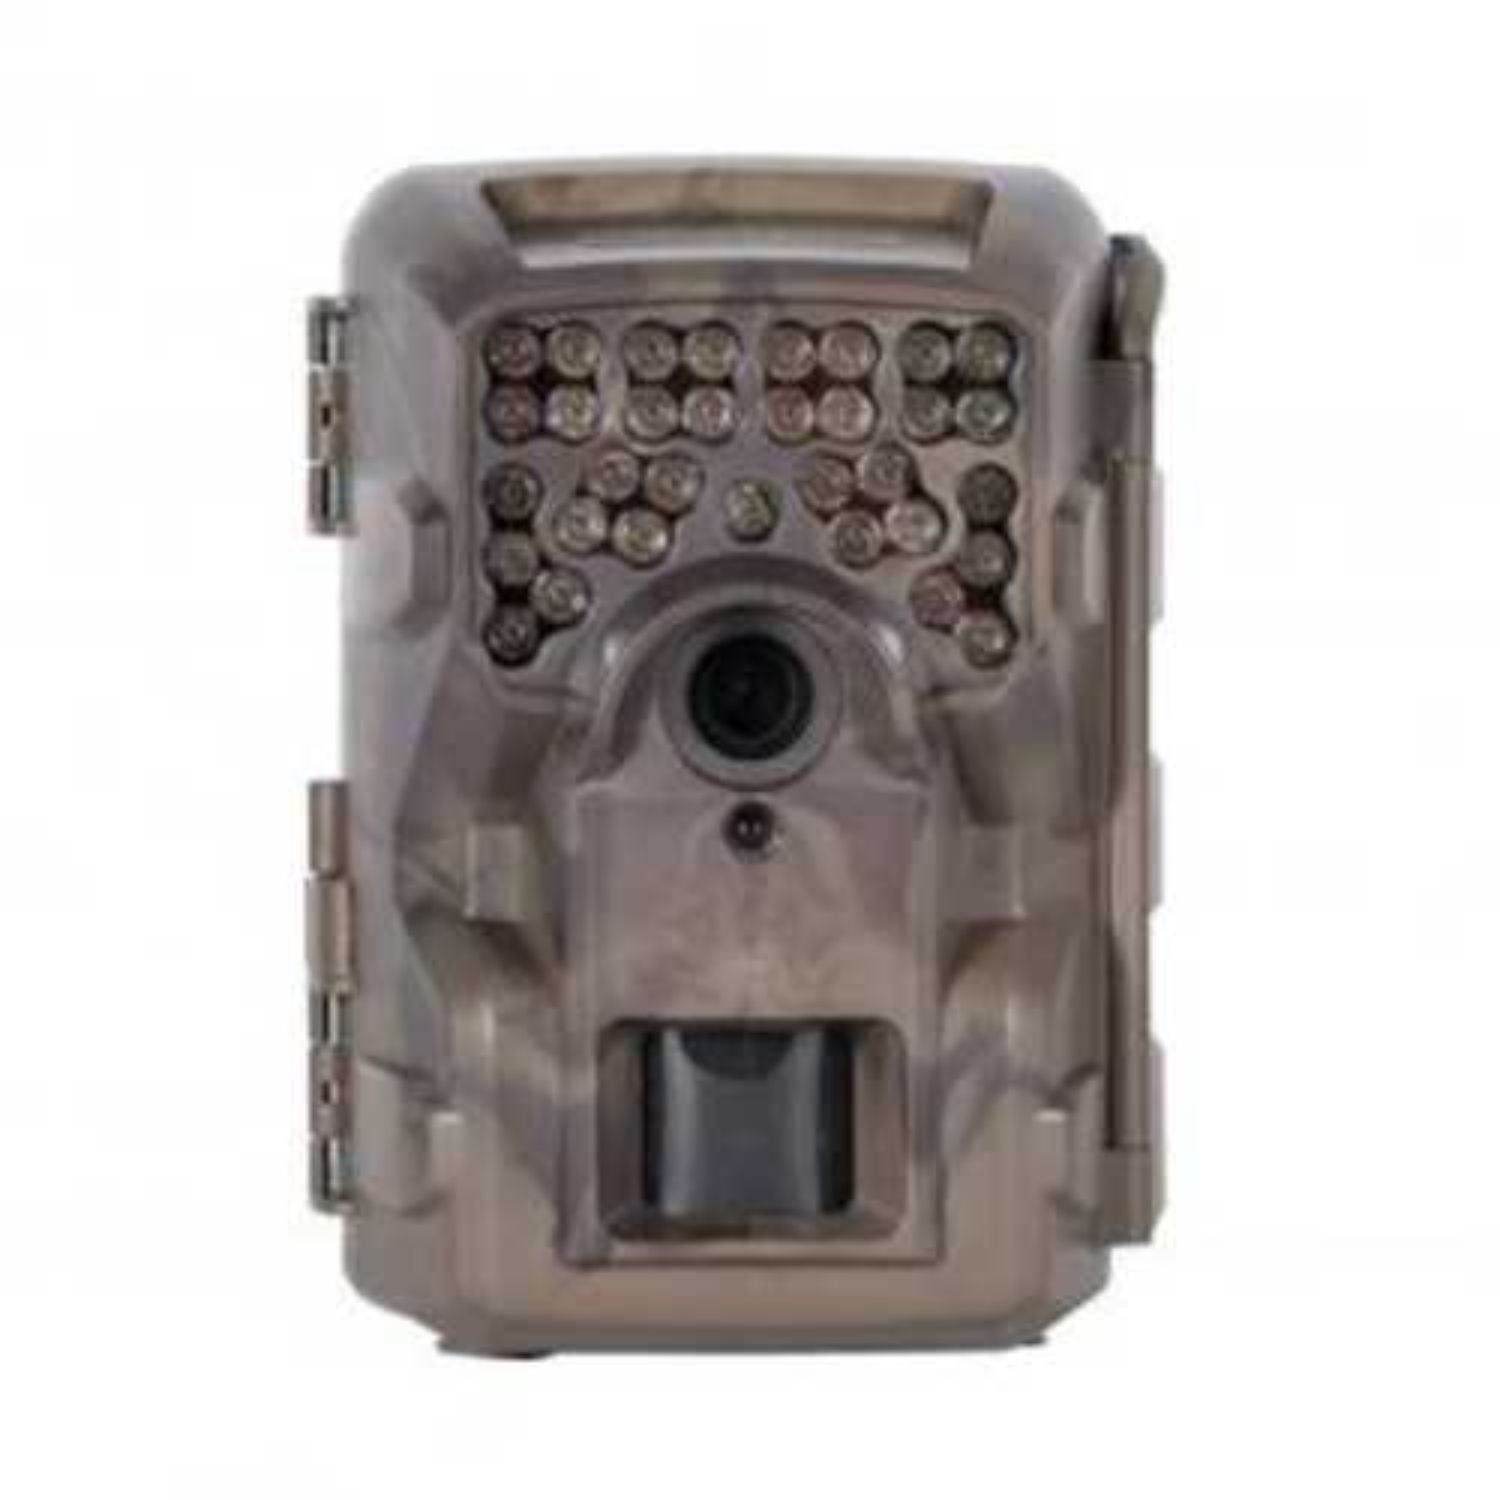 New Moultrie M-4000I Scouting Trail Cam Deer Security Camera 16MP MCG-13333 